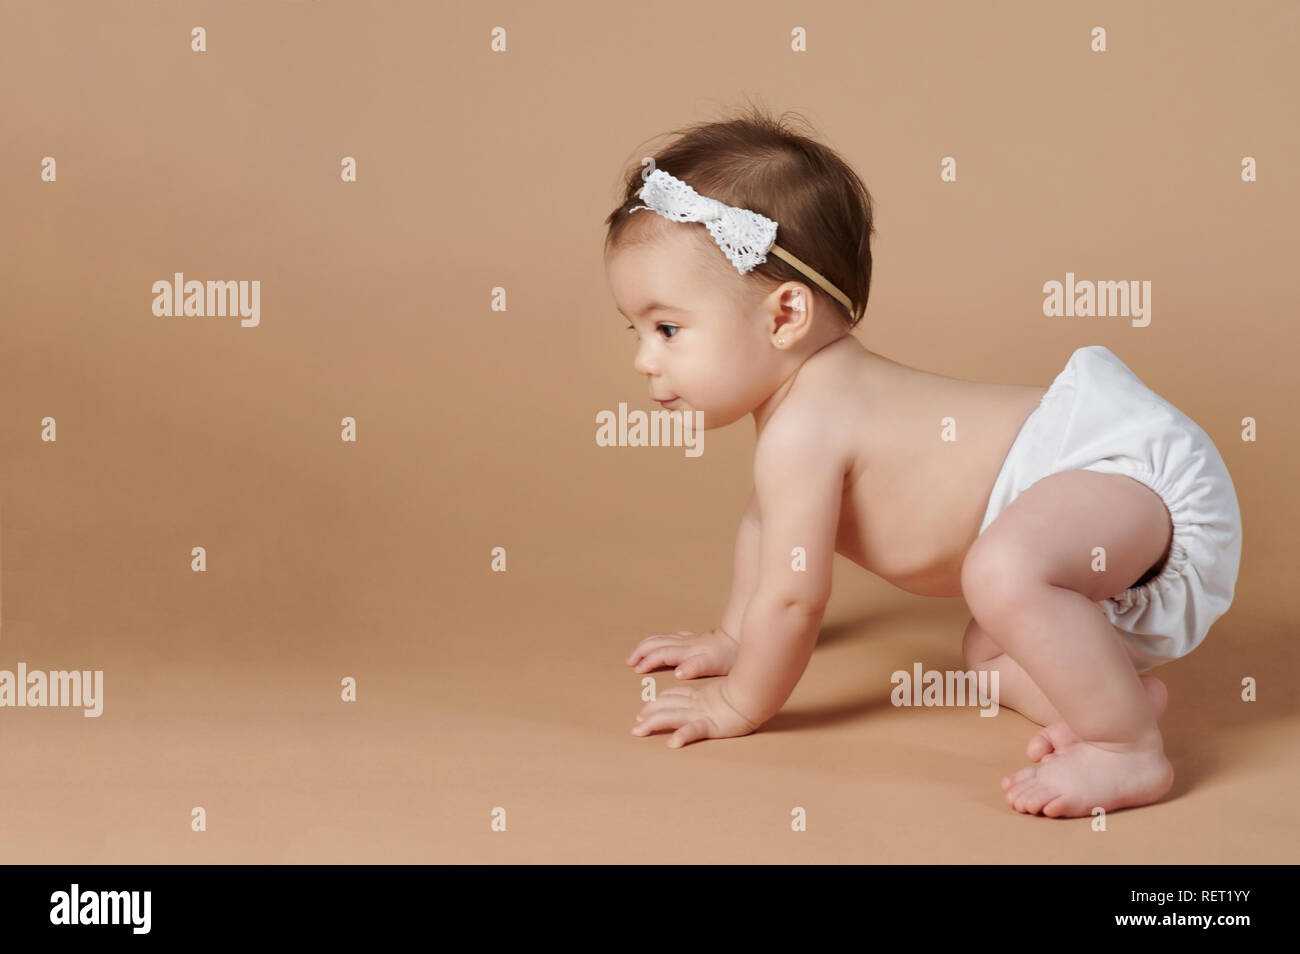 Small baby crawl on browncolor studio  background Stock Photo